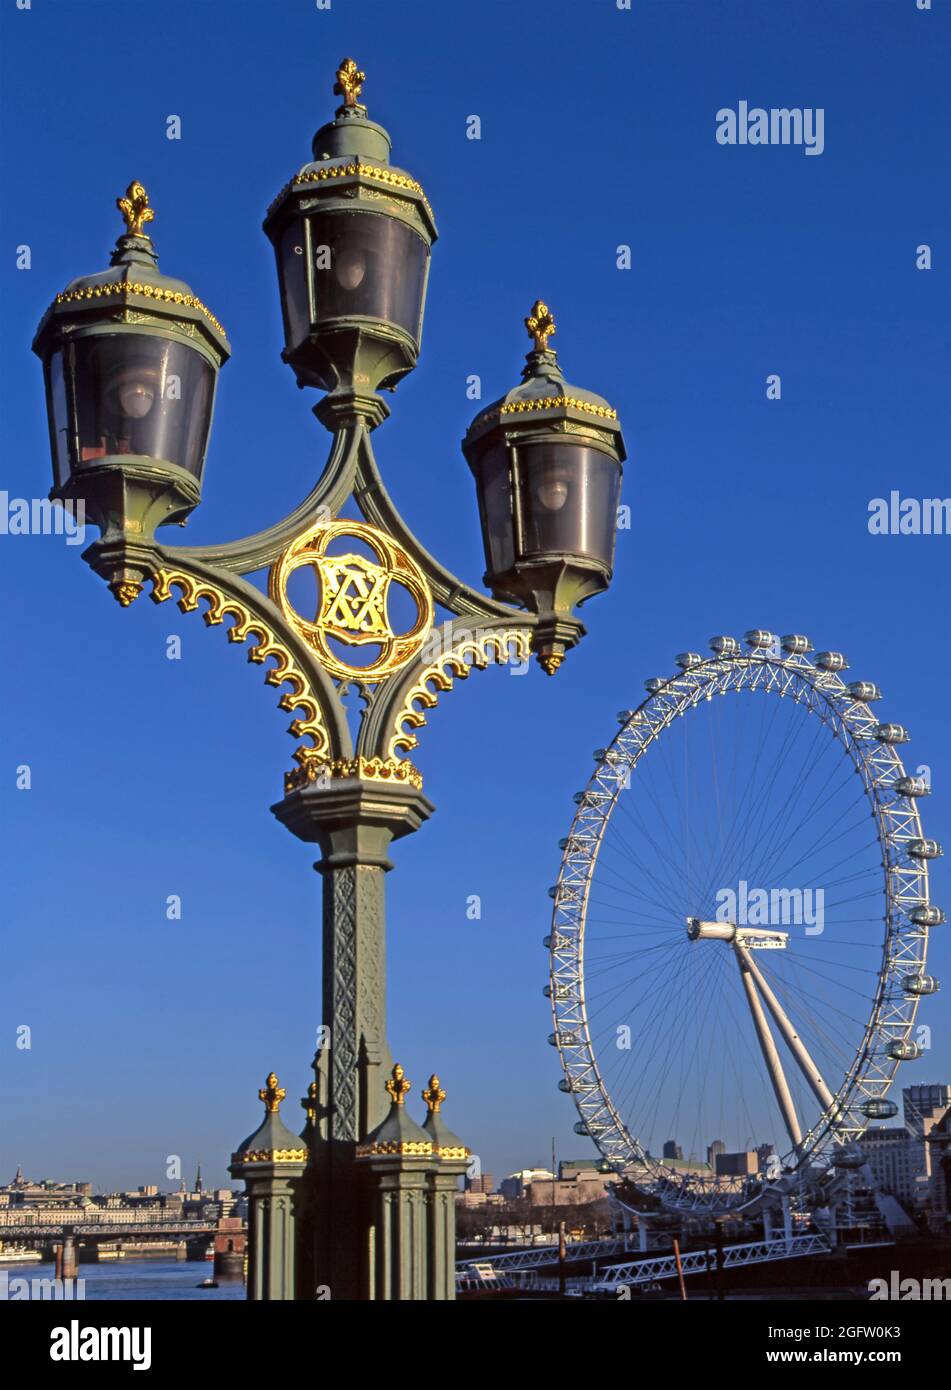 Ancient and modern archive 1999 view of the London Eye ferris wheel in position ready for its ceremonial opening for the new year 2000 millennium celebrations a now famous landmark beyond a close up of historical 1990s archival image of Victorian three cluster street lights on cast iron lamp post column on Westminster road bridge a  comparison of eye-catching riverside structures in London England UK Stock Photo